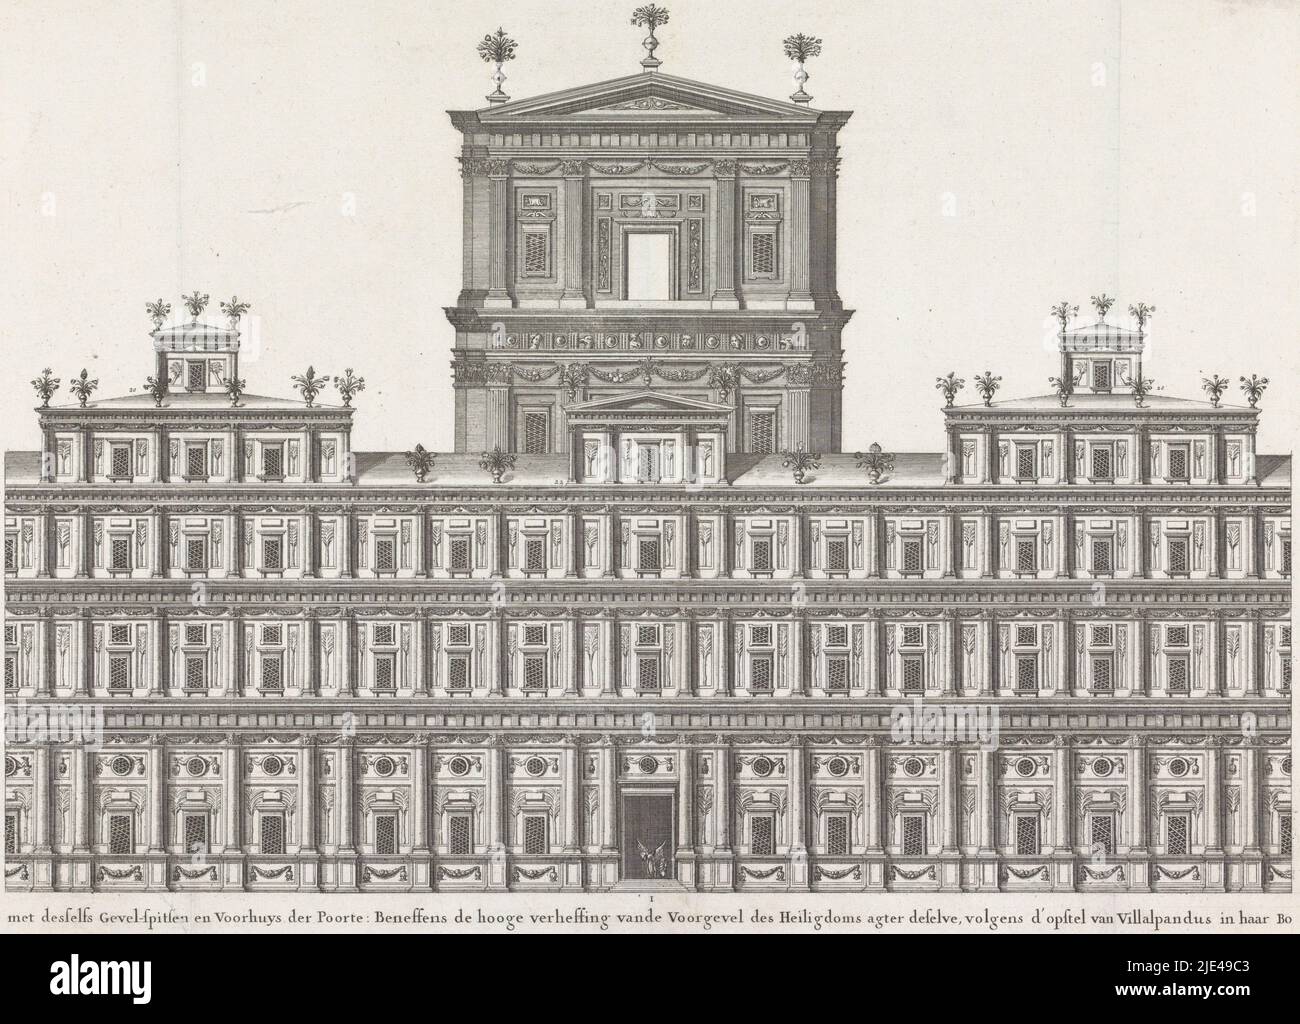 Facade of the new temple (center), anonymous, 1618, The center section of the facade of the new temple at Jerusalem, as it would look according to Juan Bautista Villalpando in his book Ezechielem Explanationes, 1596. Villalpando based his work on Ezekiel's visions of the new temple in the Bible book Ezekiel. In the doorway an angel with a measuring rod and the prophet Ezekiel., print maker: anonymous, Netherlands, 1618, paper, etching, h 294 mm × w 402 mm Stock Photo